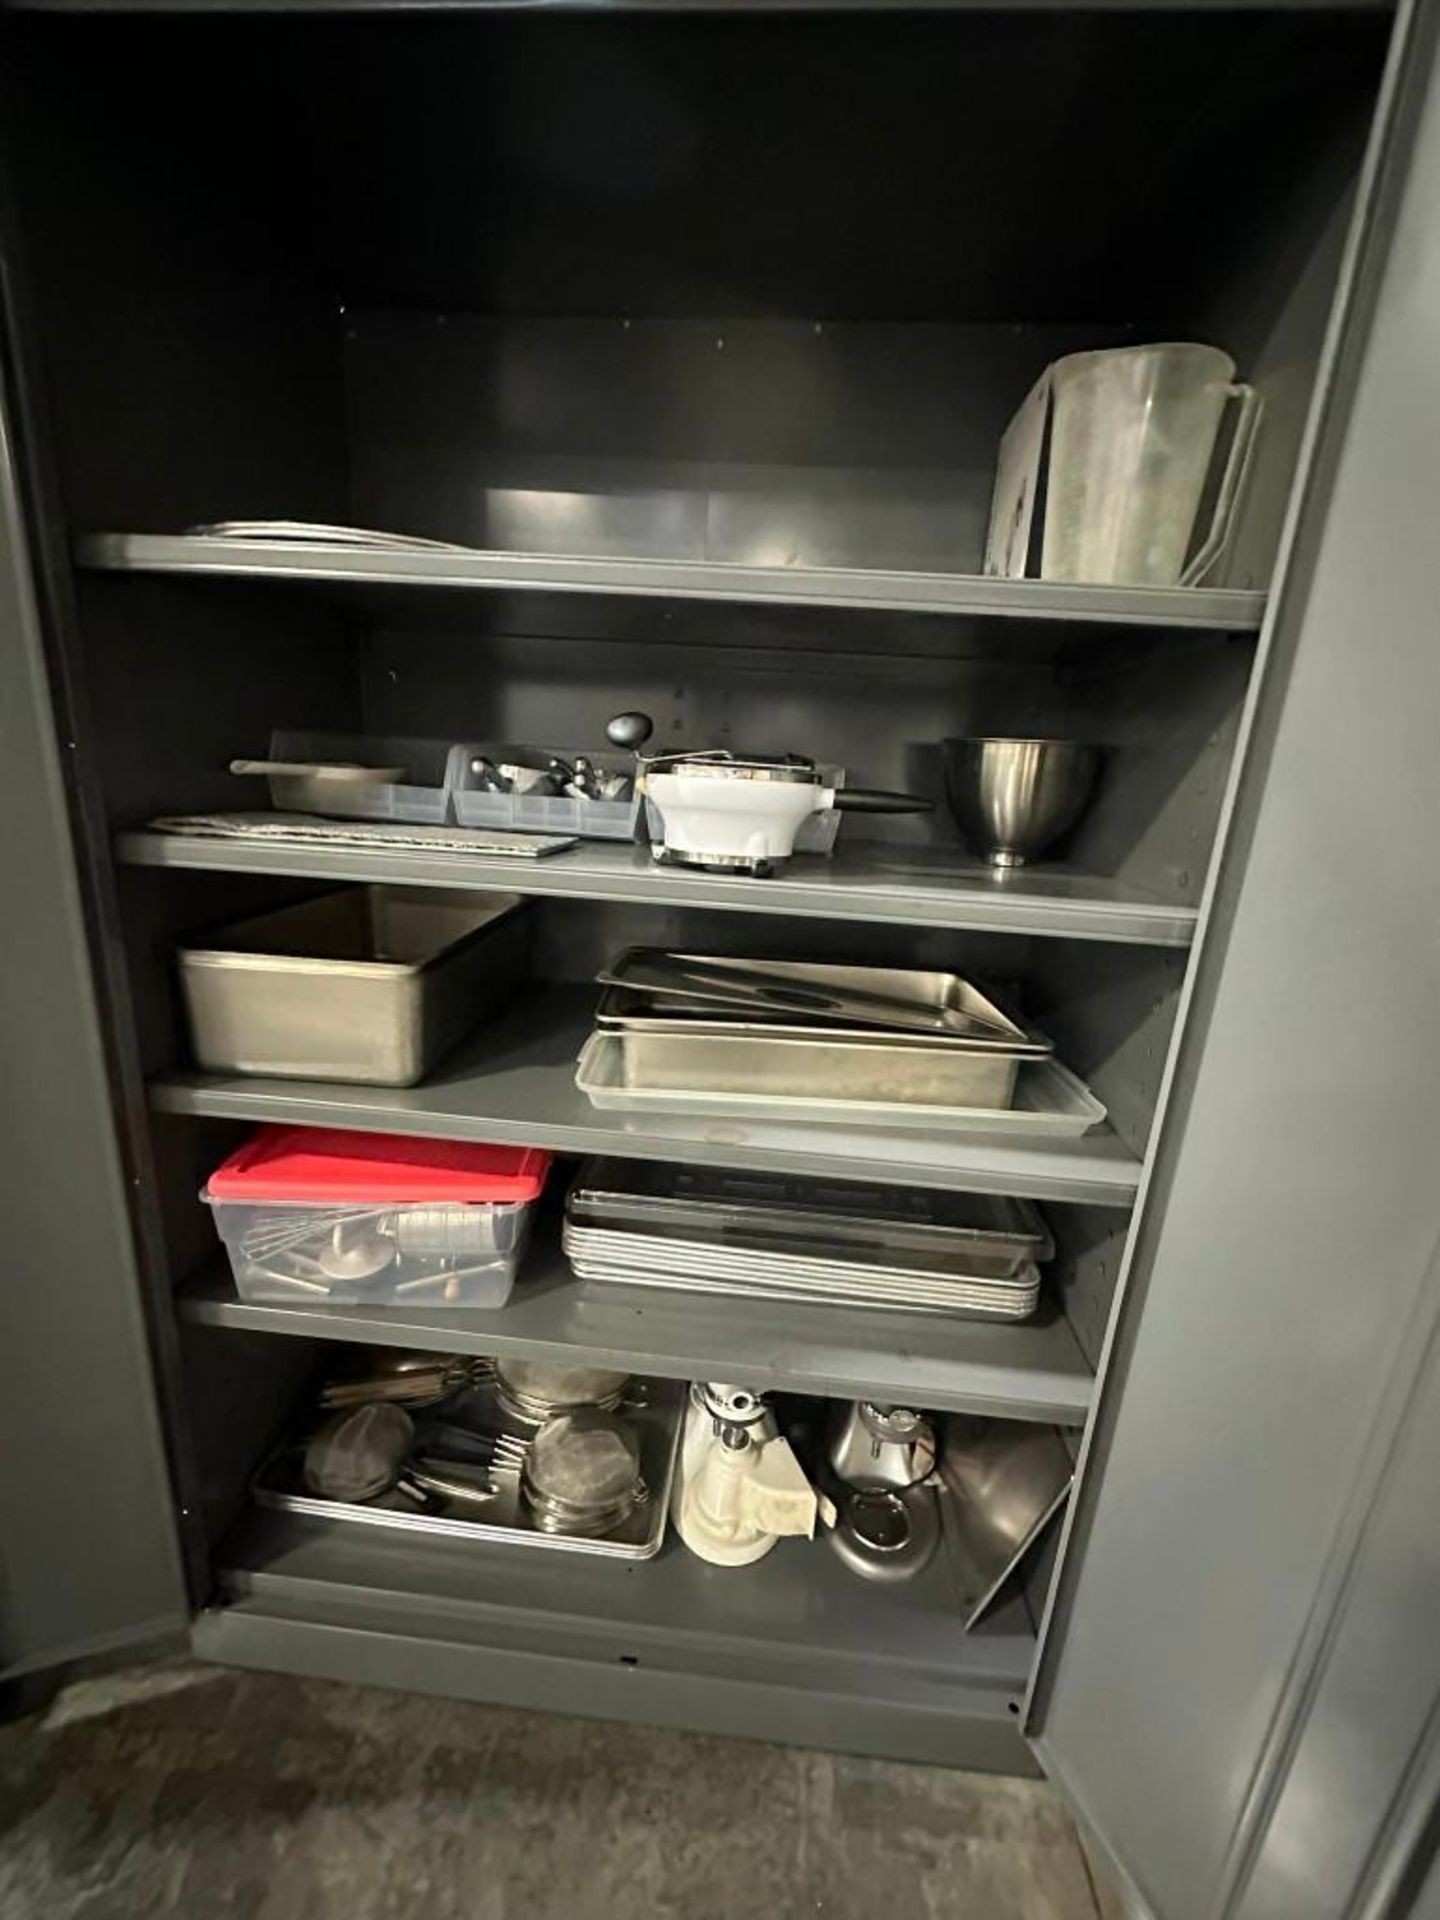 Lot: Uline Steel Cabinet with Assorted Pans, Cookware, and Misc. Contents - Image 3 of 3